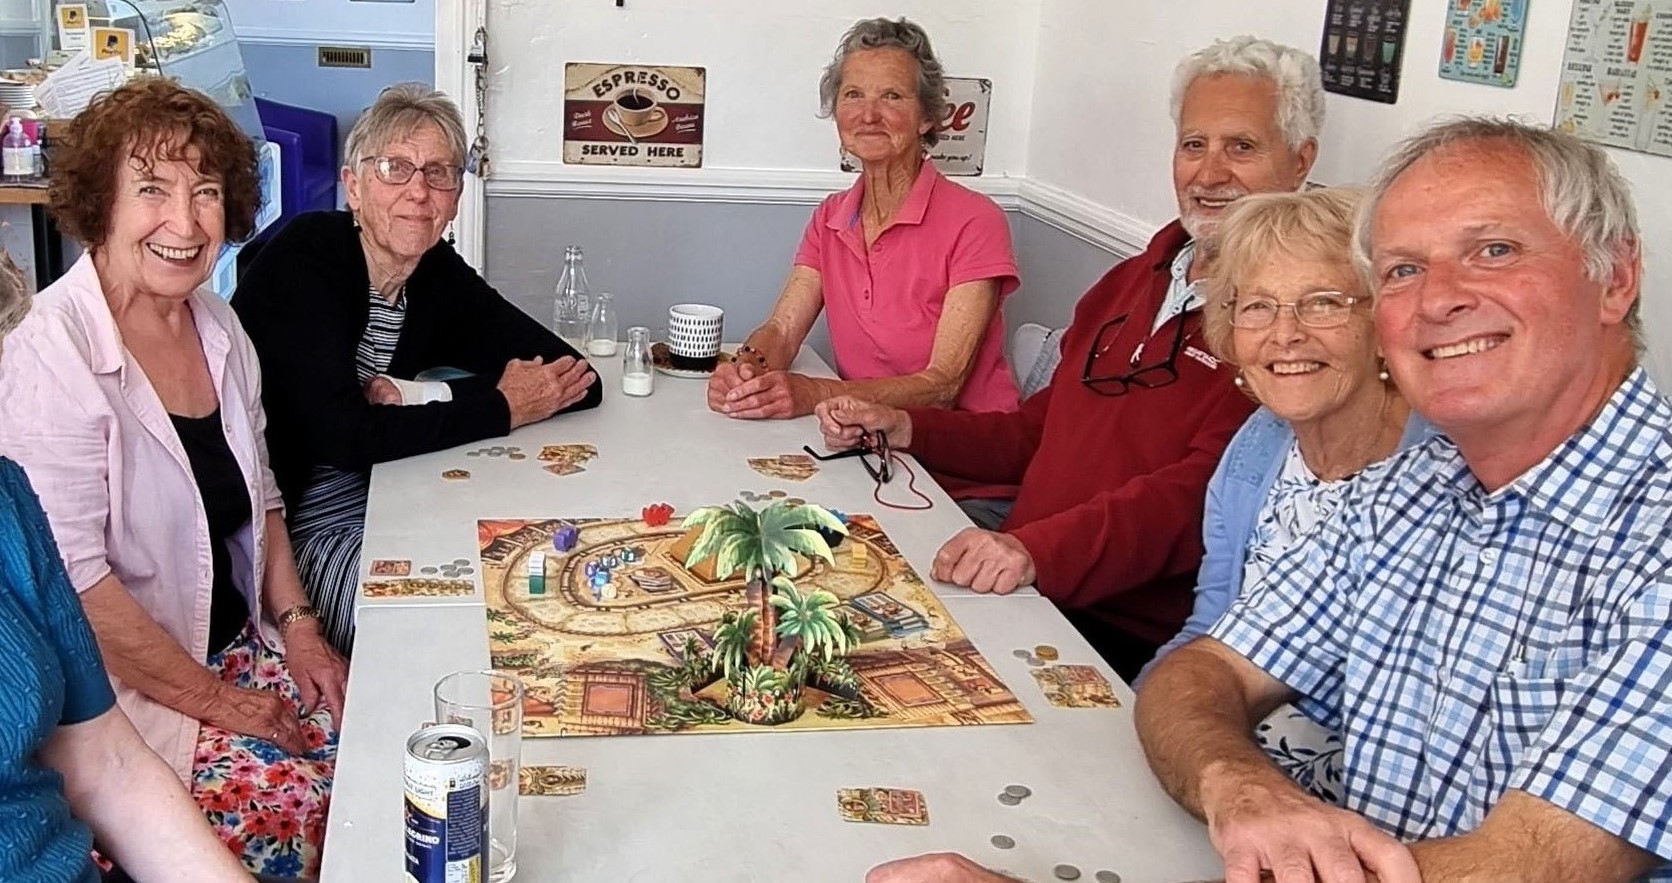 The Board Games group